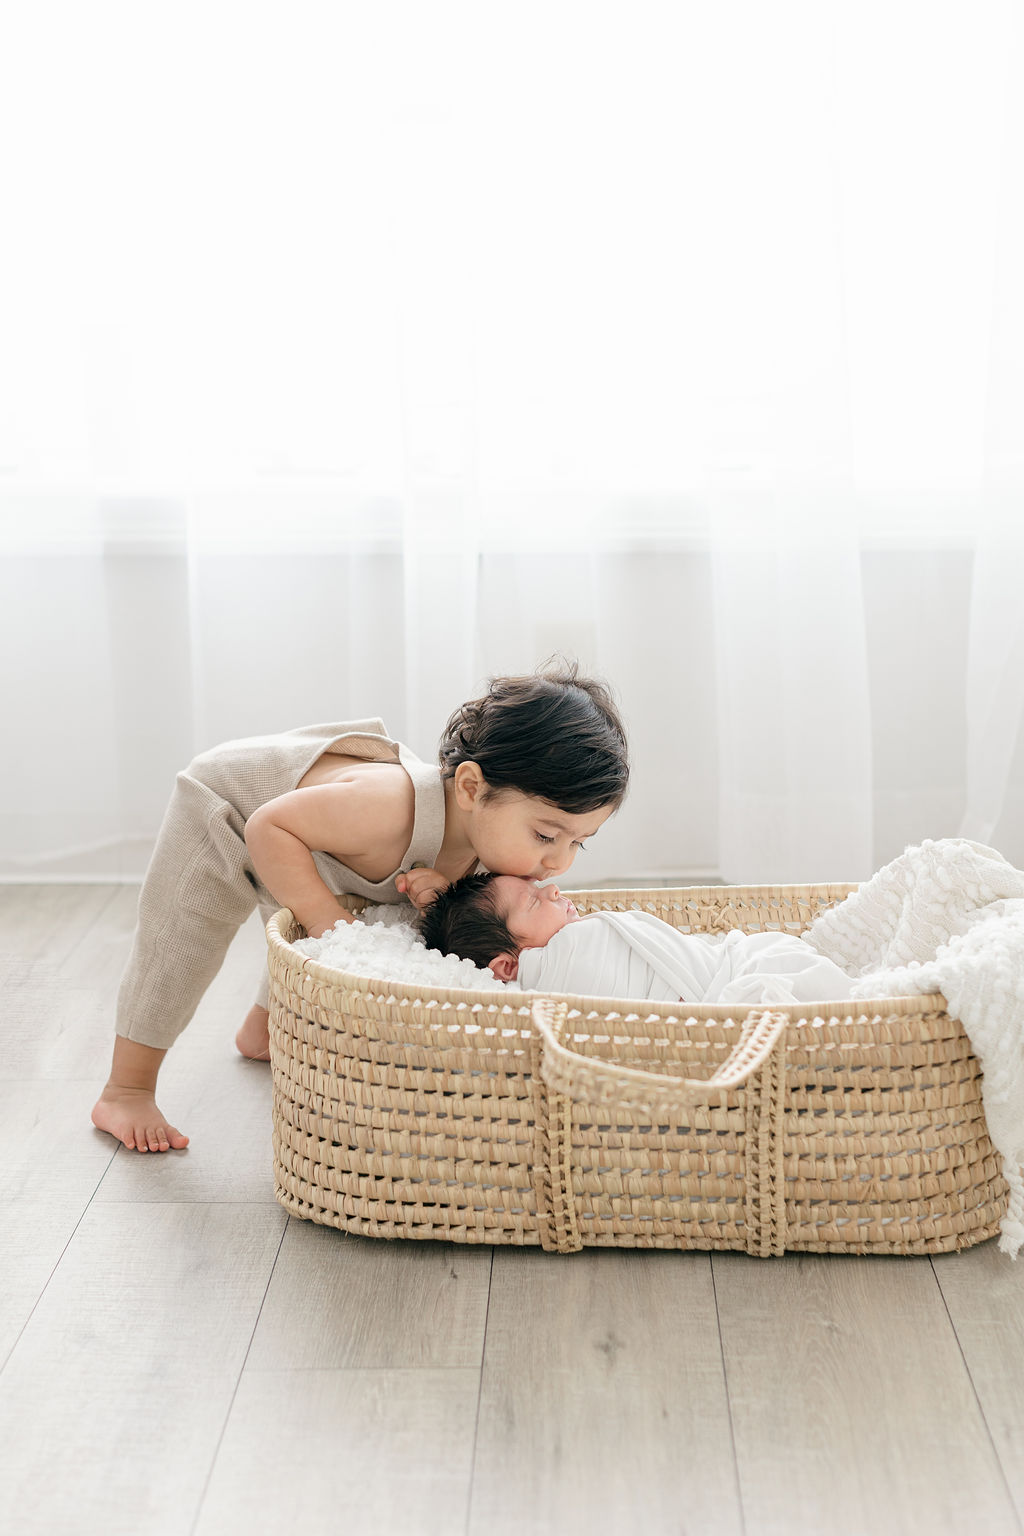 A toddler boy in tan overall kisses the head of his sleeping newborn sibling in a woven basket